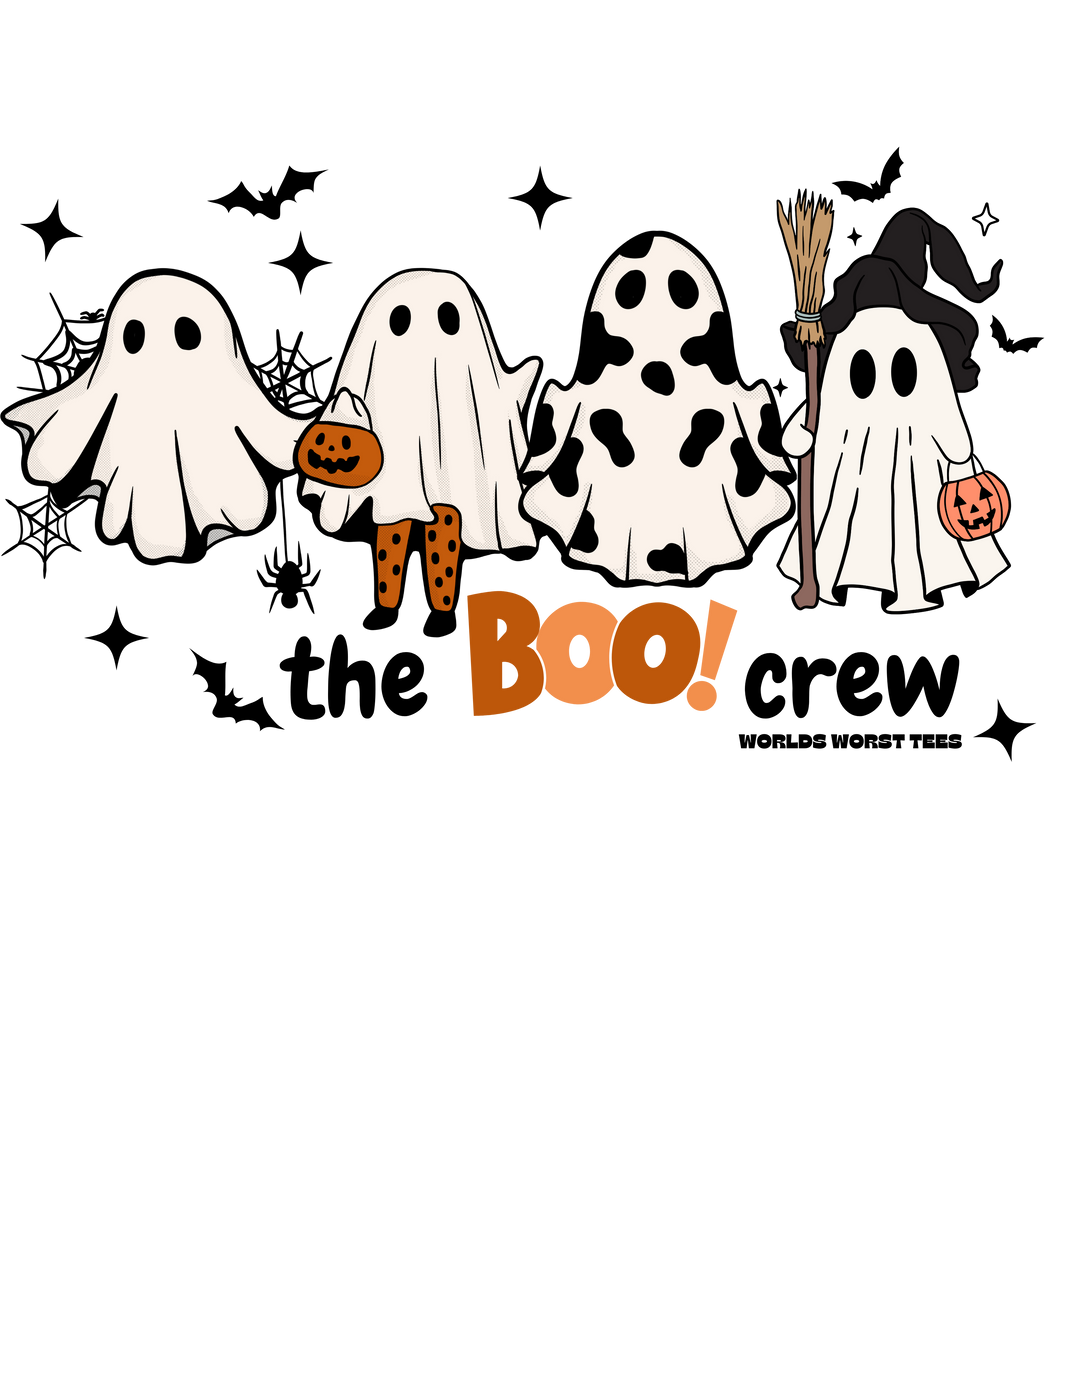 A playful Boo Crew Long-Sleeved Onesie for infants, featuring a group of cartoon ghosts, a broom, and a pumpkin. Crafted from 100% cotton with ribbed bindings for durability and easy changing. Dimensions: NB (0-3M) - Width: 7.24, Length: 10.75, Sleeve length: 8.37.